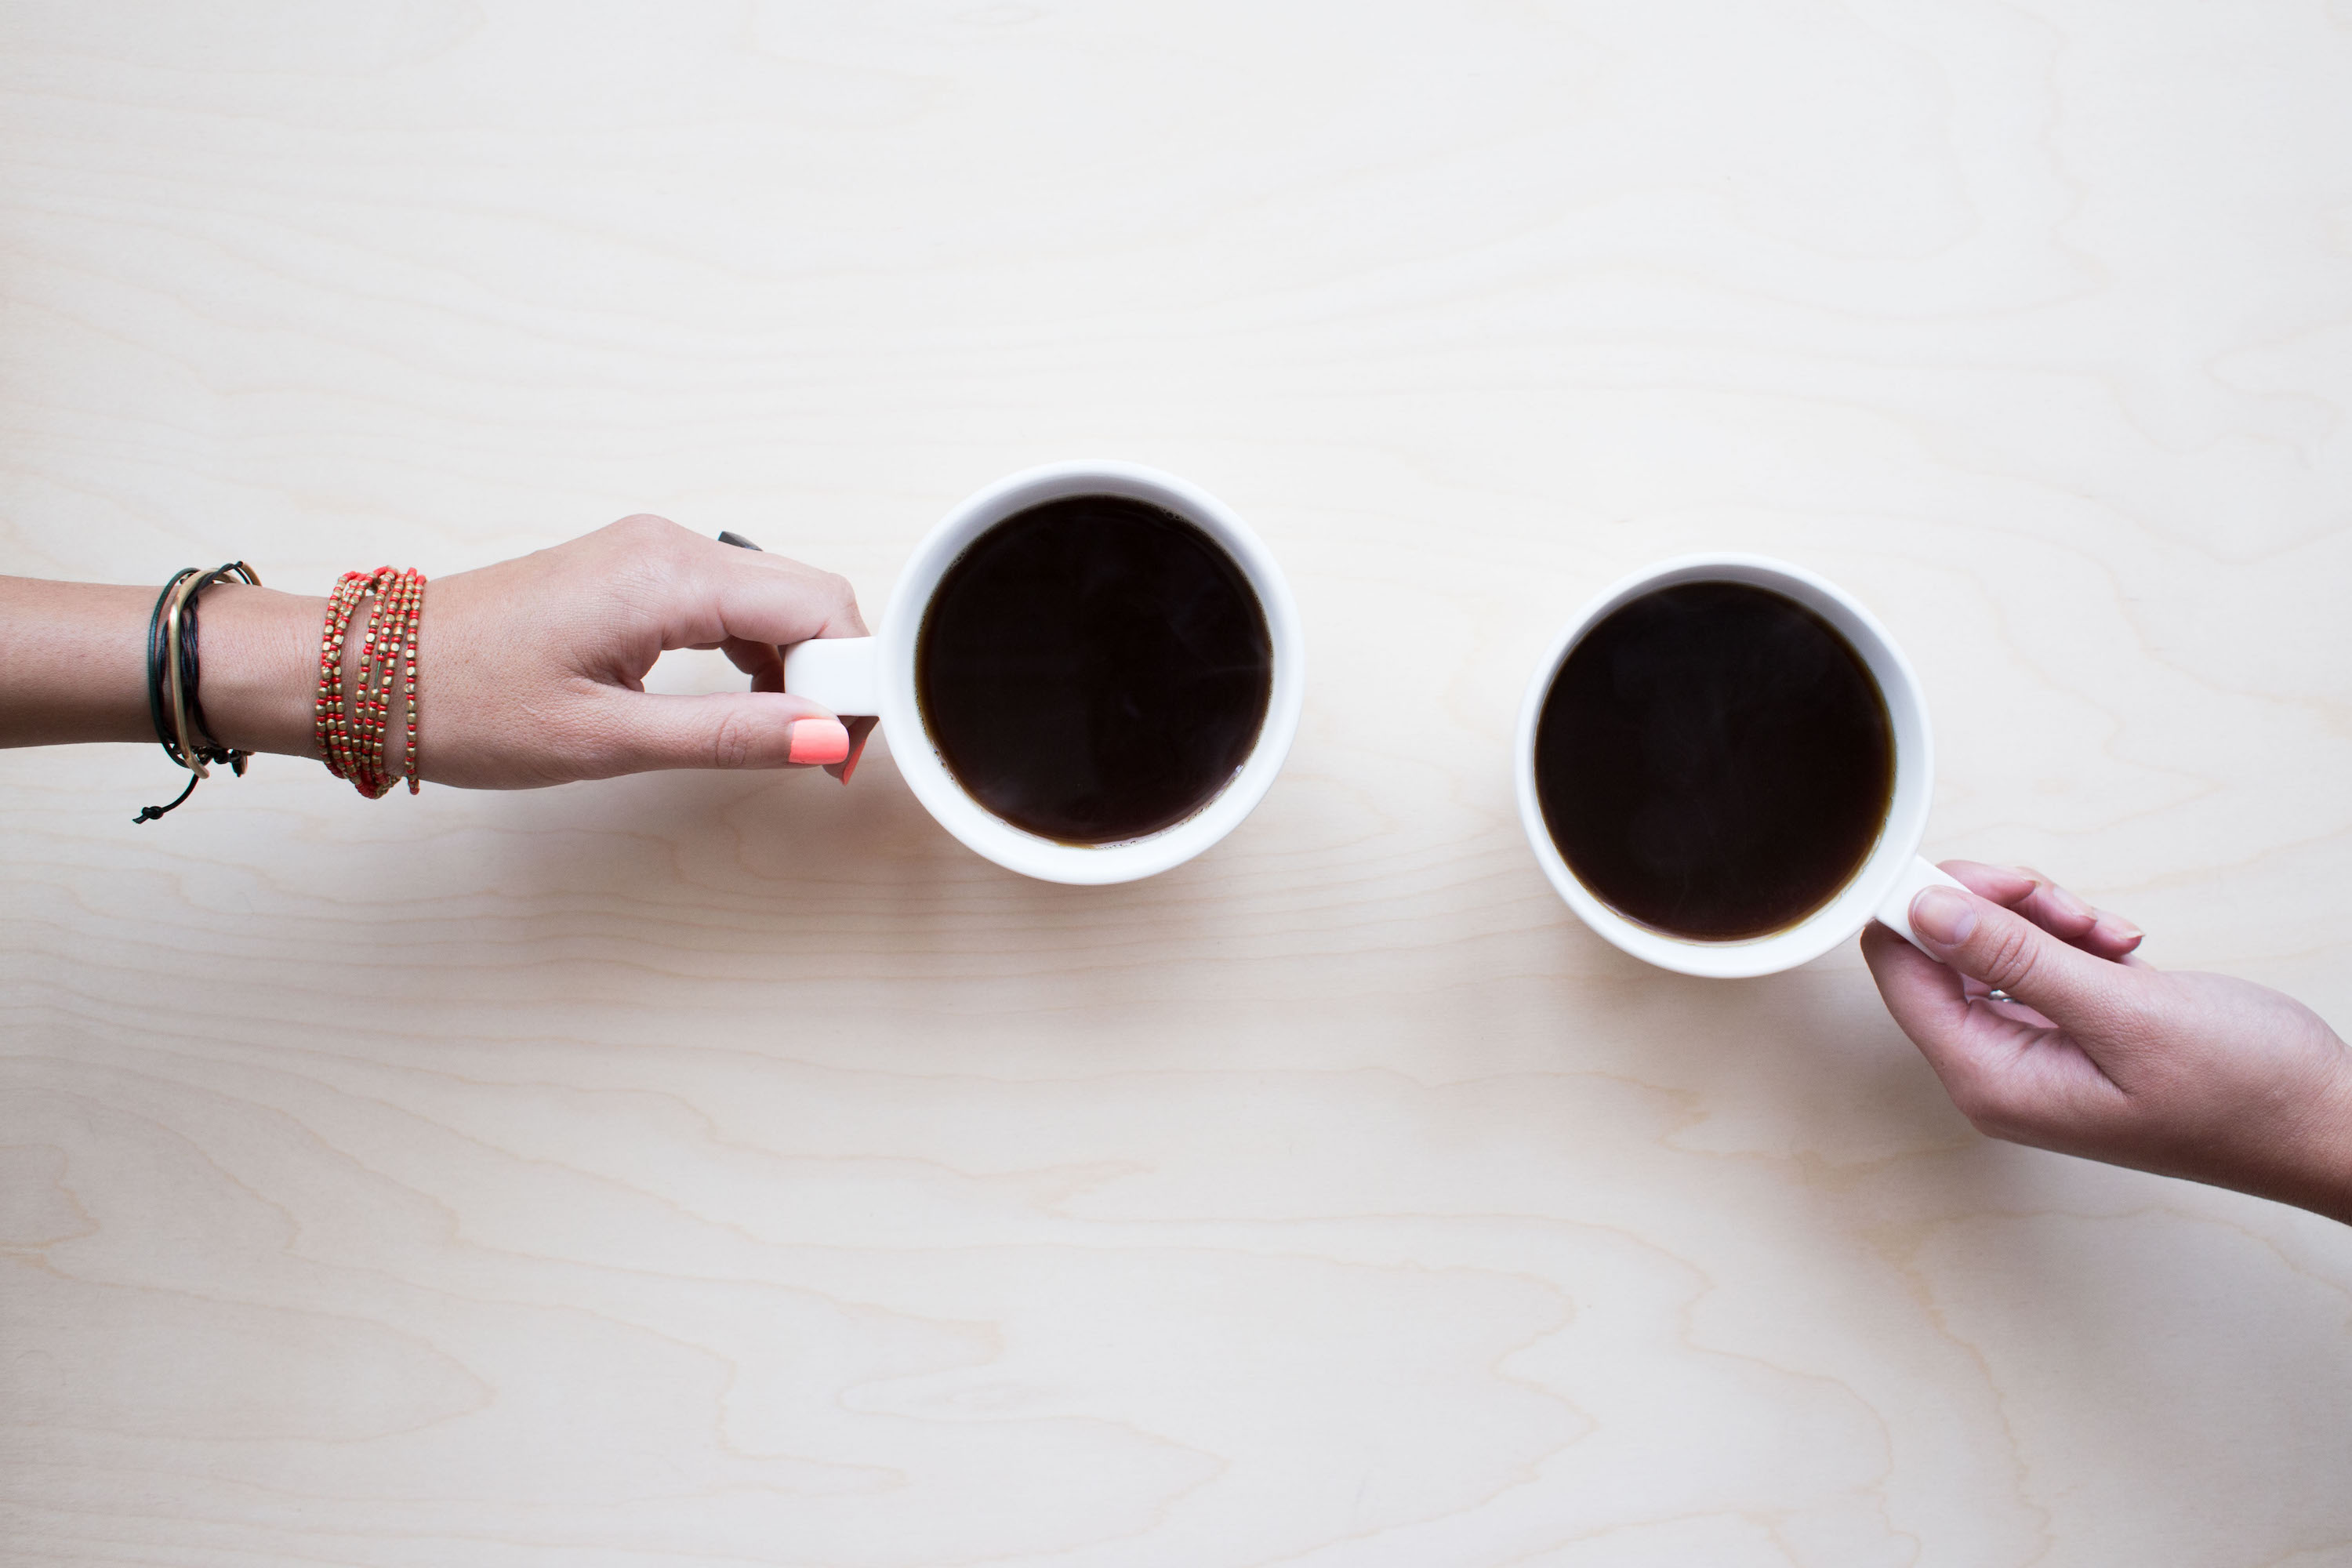 Two hands hold two coffee cups on a wooden table.